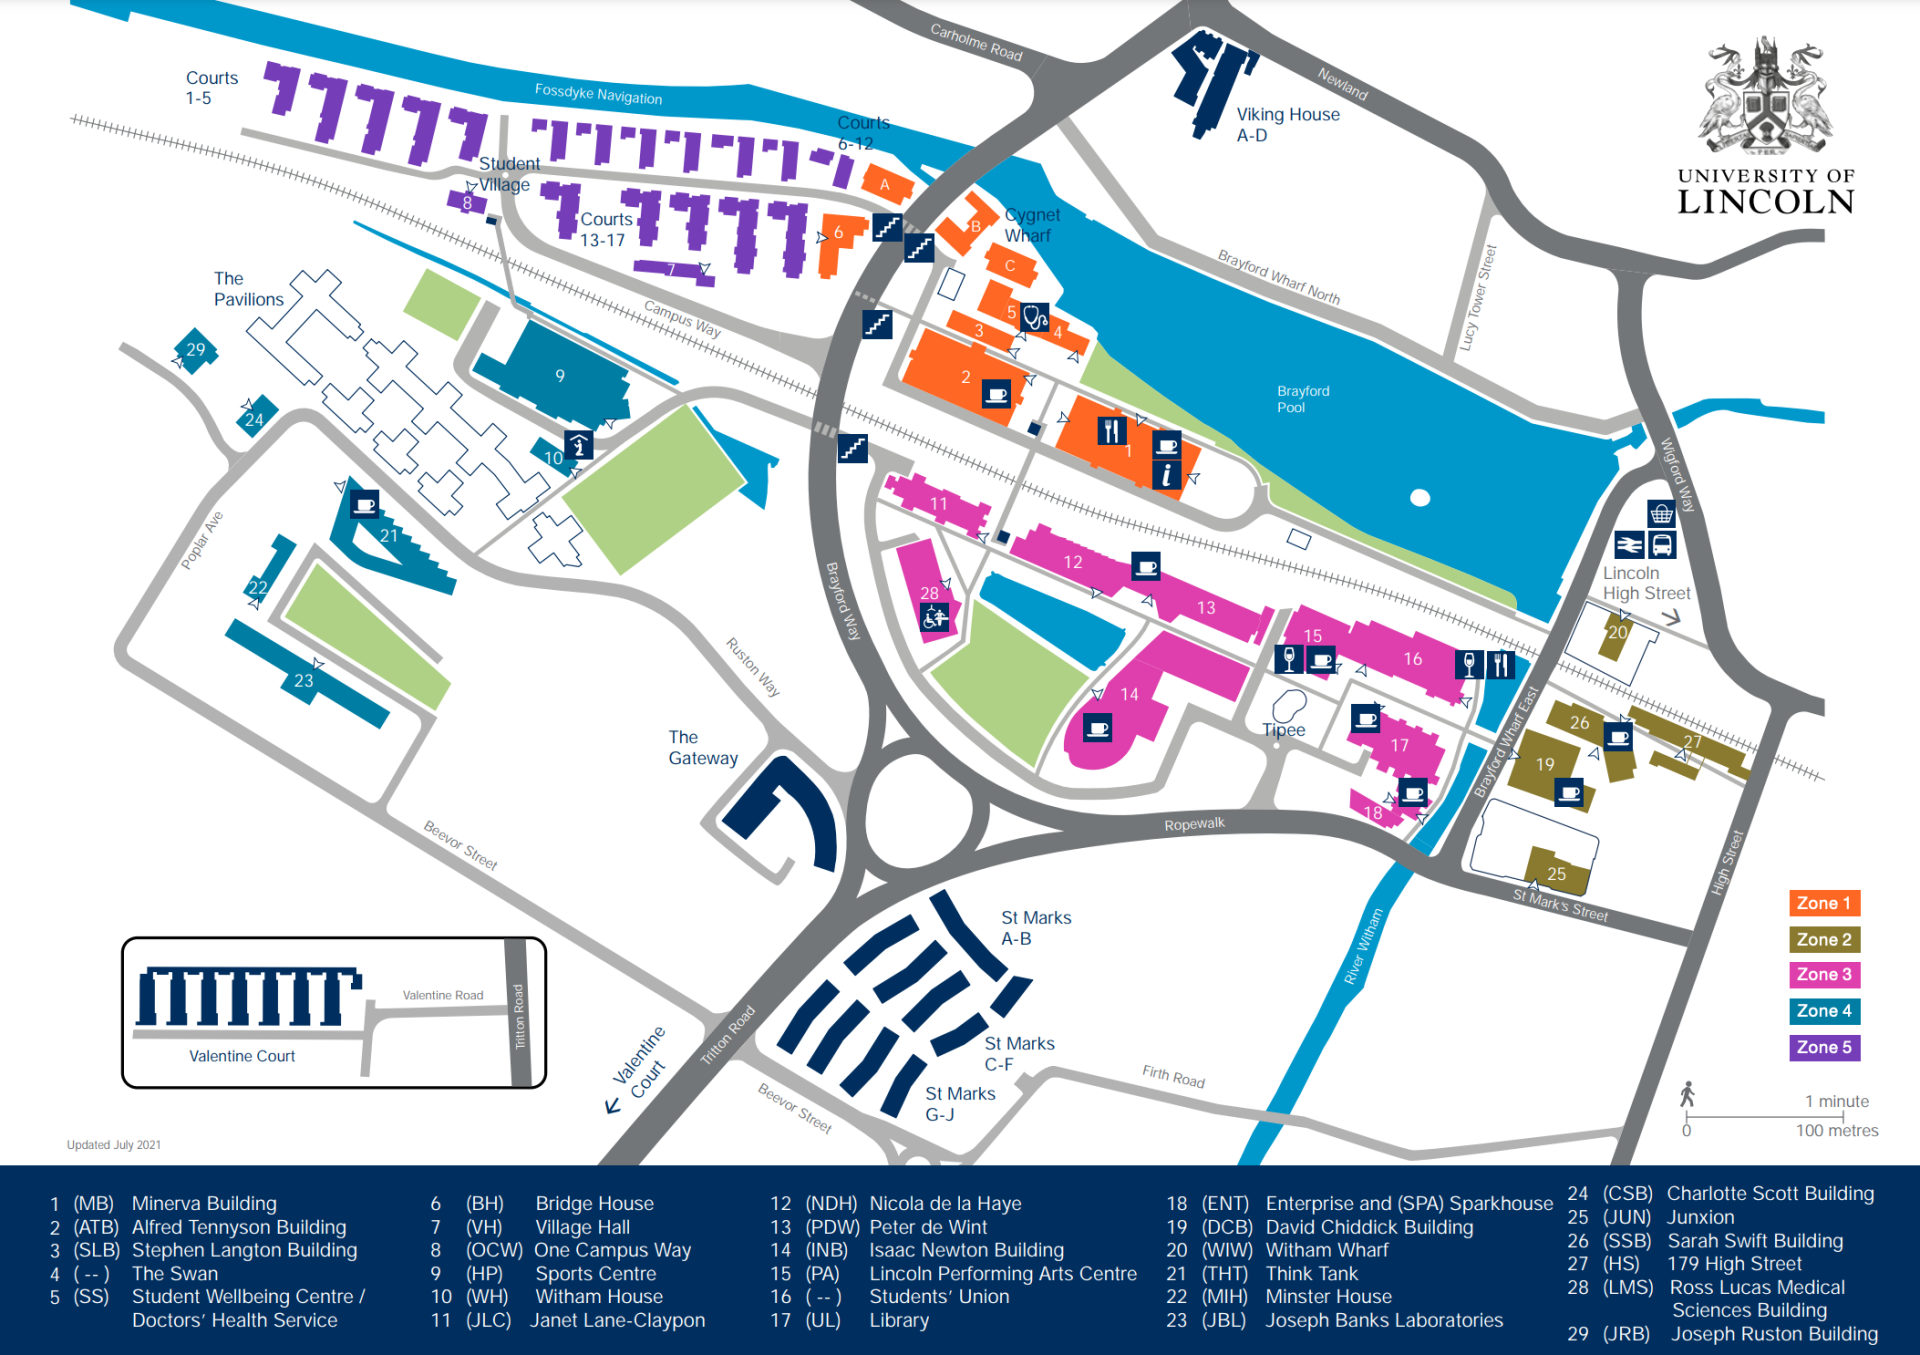 A map of the University of Lincoln campus